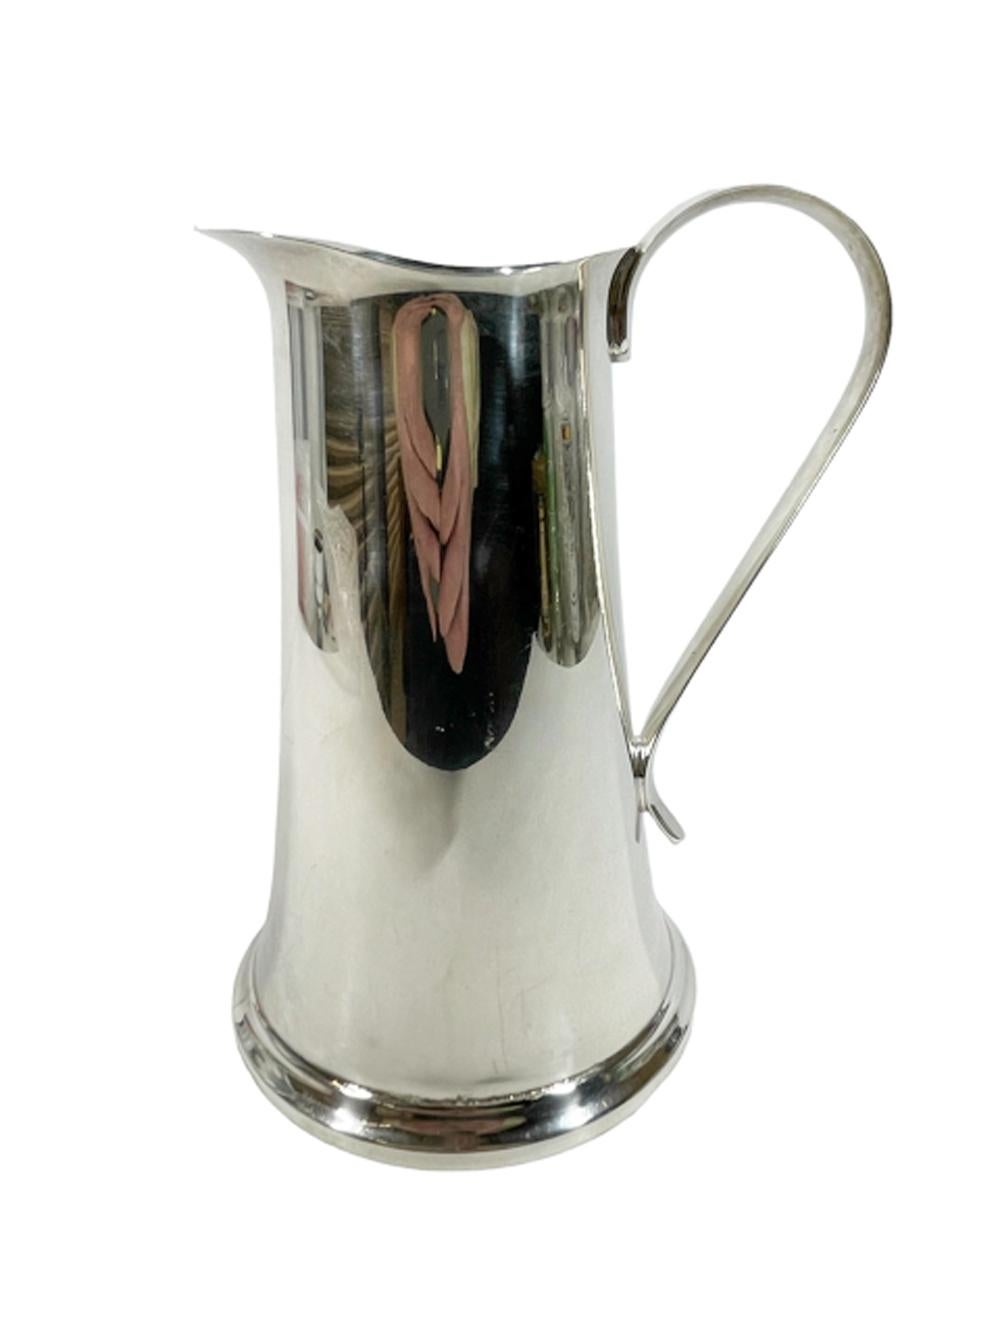 Mid-Century silver plate cocktail / bar pitcher by The Sheffield Silver Company, of tapered form with an applied handle and built in strainer / ice dam inside the lip.